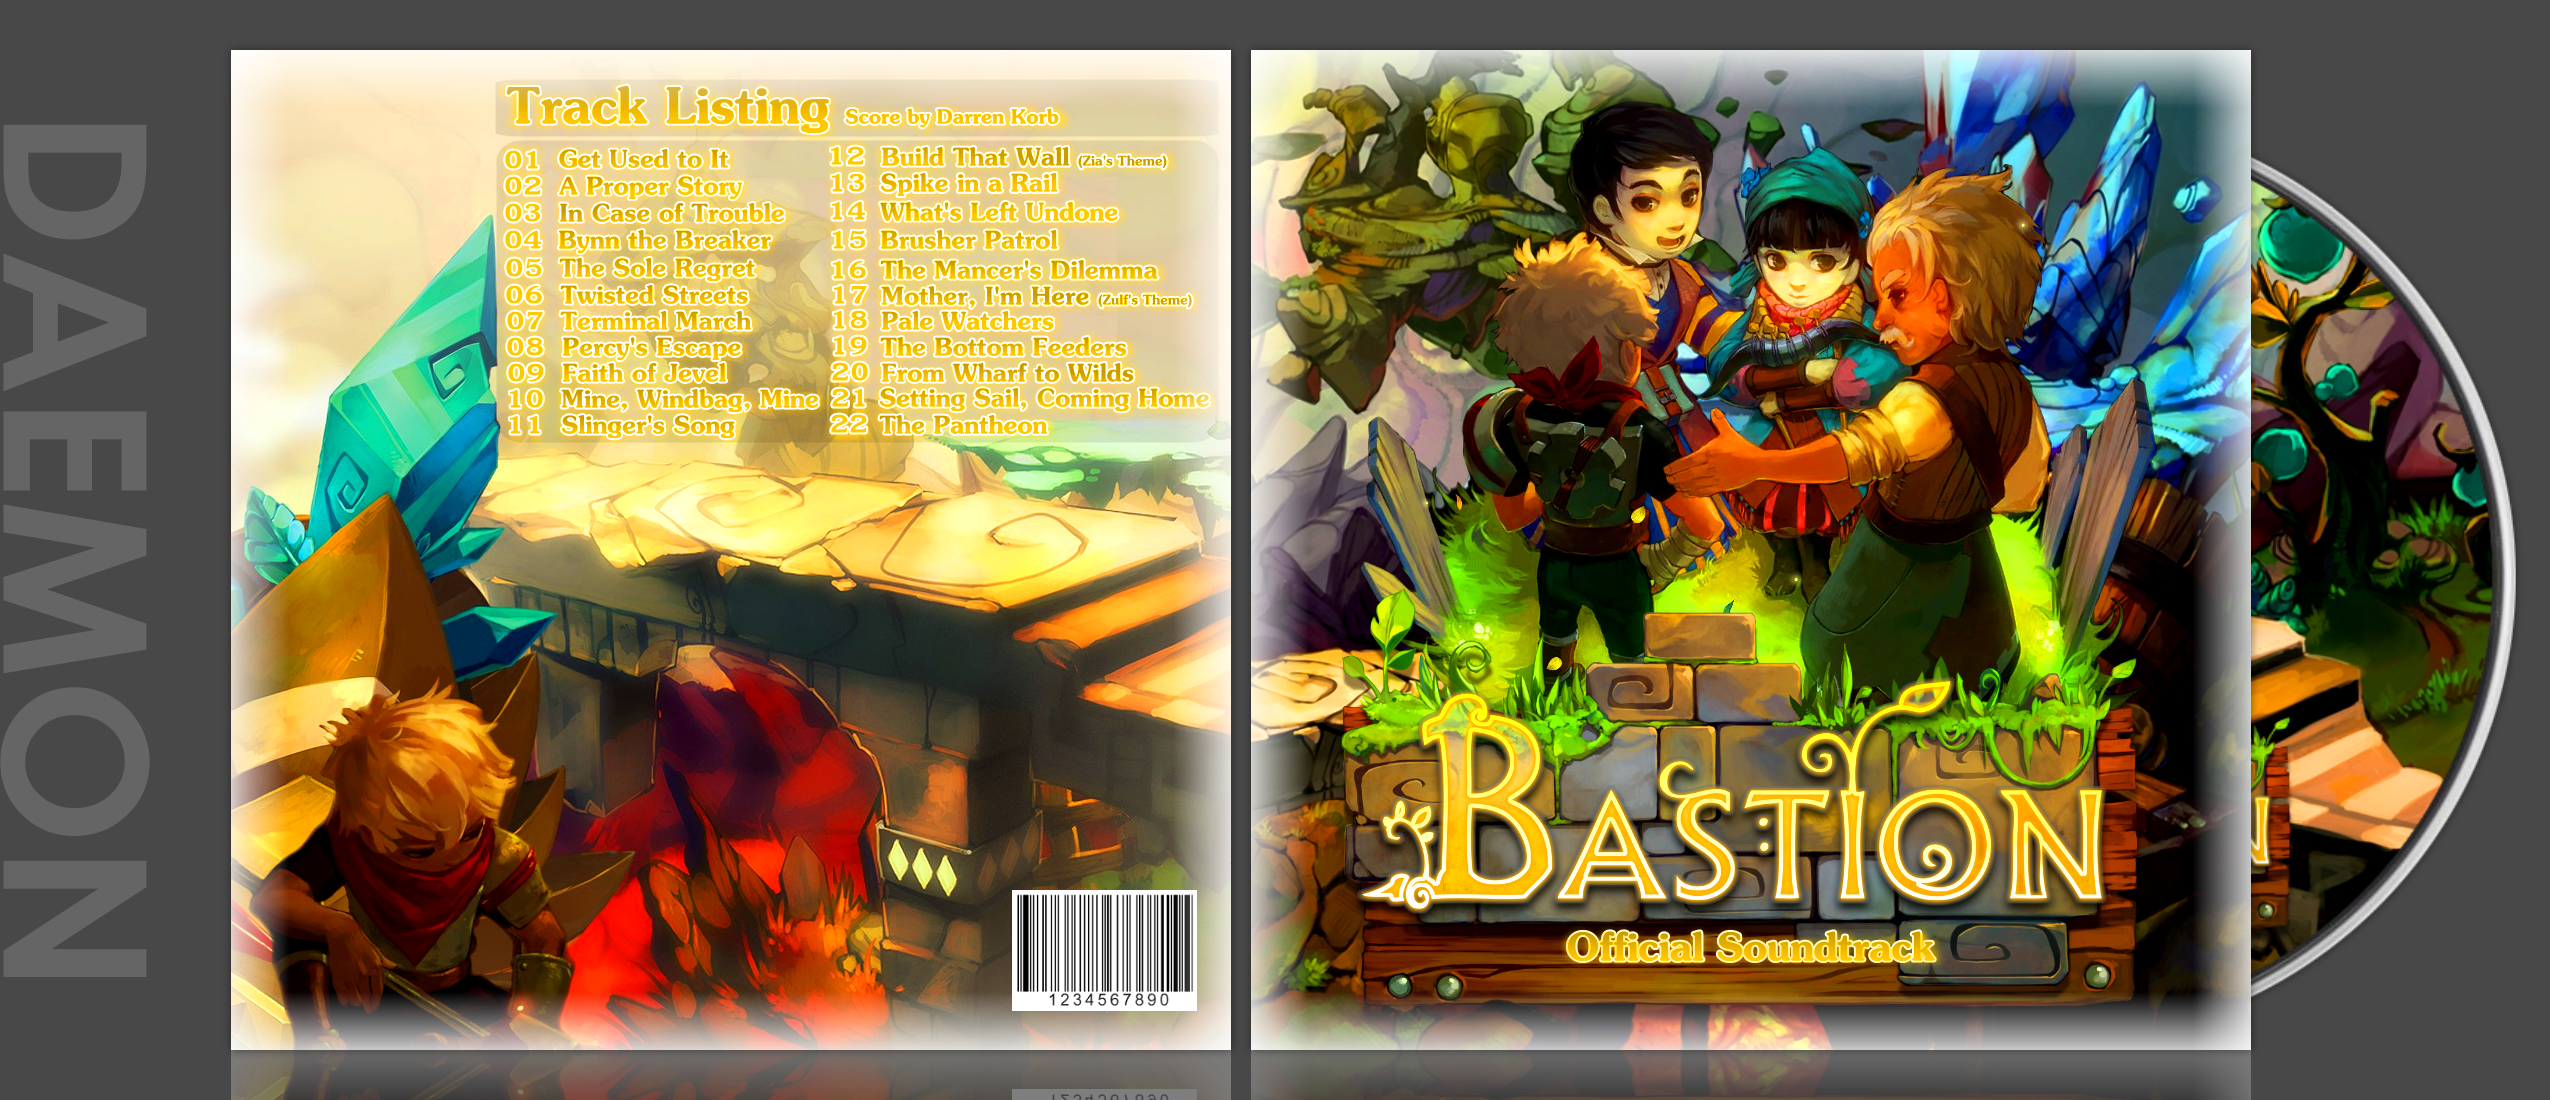 Bastion - Official Soundtrack box cover